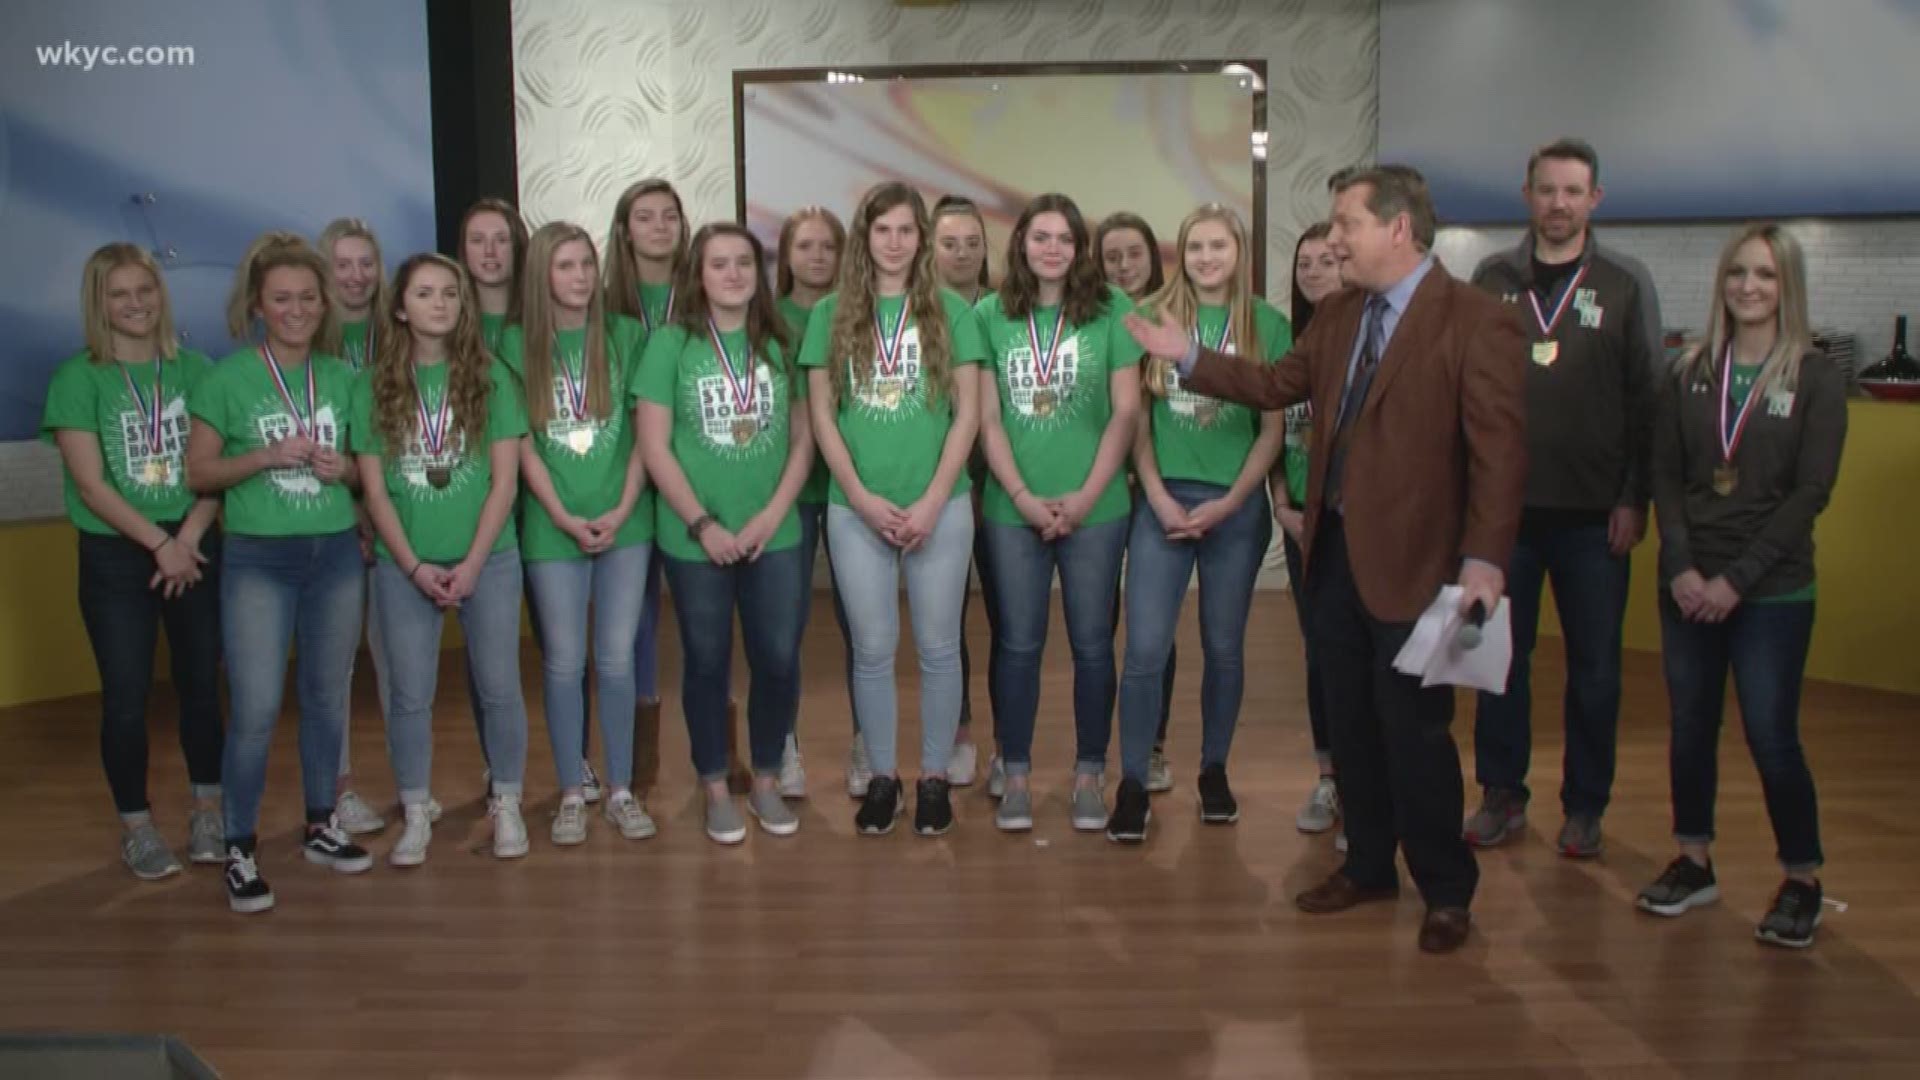 Holy Name state volleyball championship team visits Donovan Live